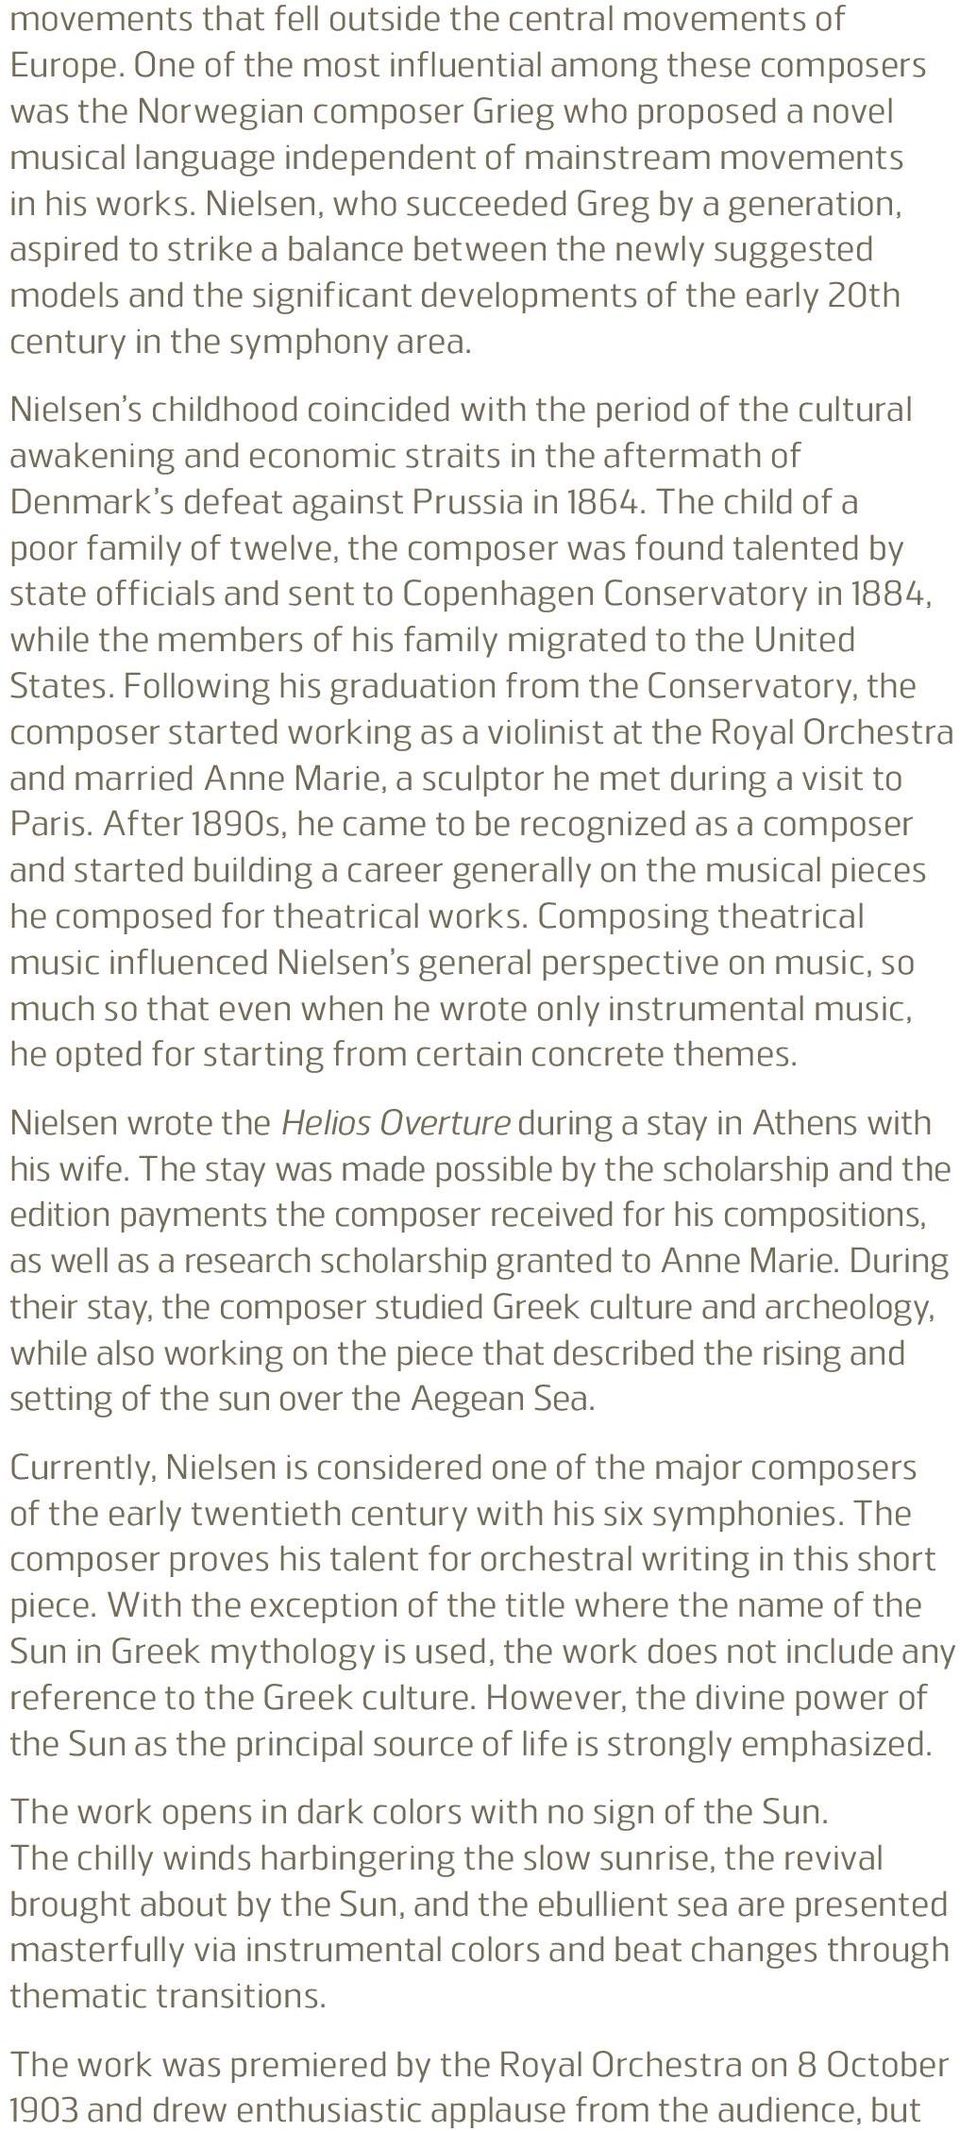 Nielsen, who succeeded Greg by a generation, aspired to strike a balance between the newly suggested models and the significant developments of the early 20th century in the symphony area.